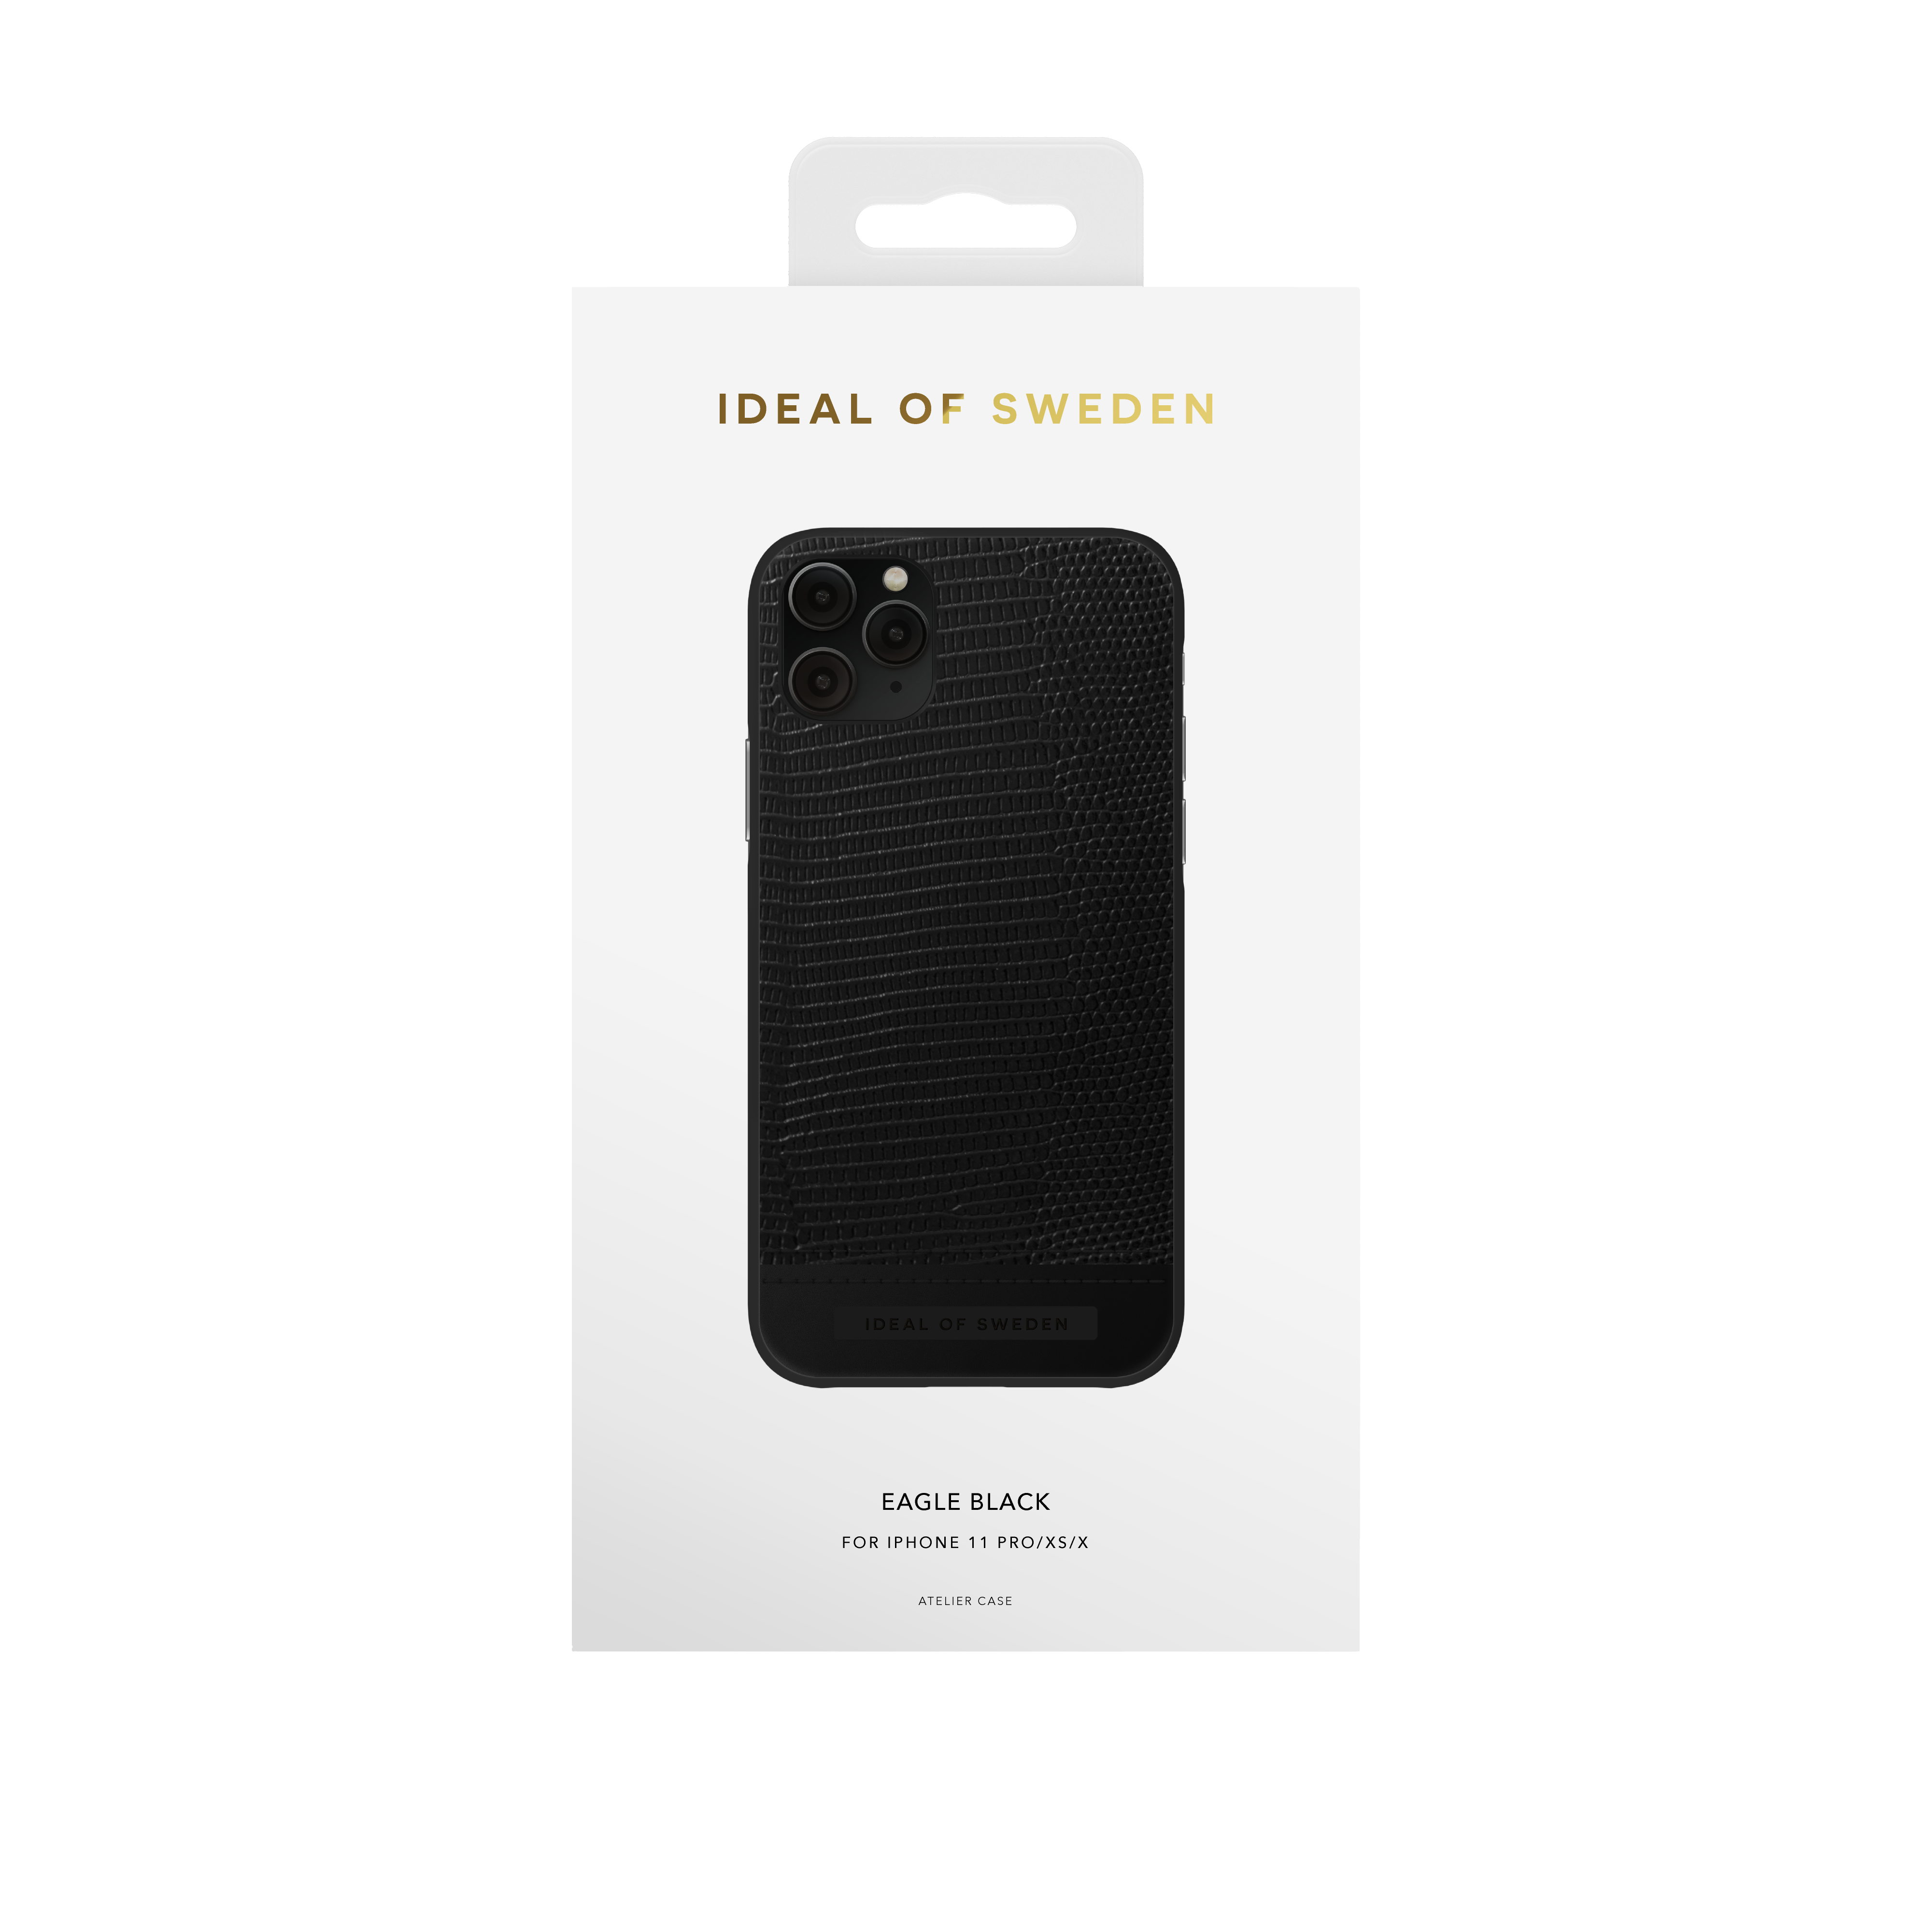 IDEAL OF 11 X, iPhone IDACAW20-1958-229, Eagle SWEDEN XS, Apple, Backcover, Black iPhone Pro, iPhone